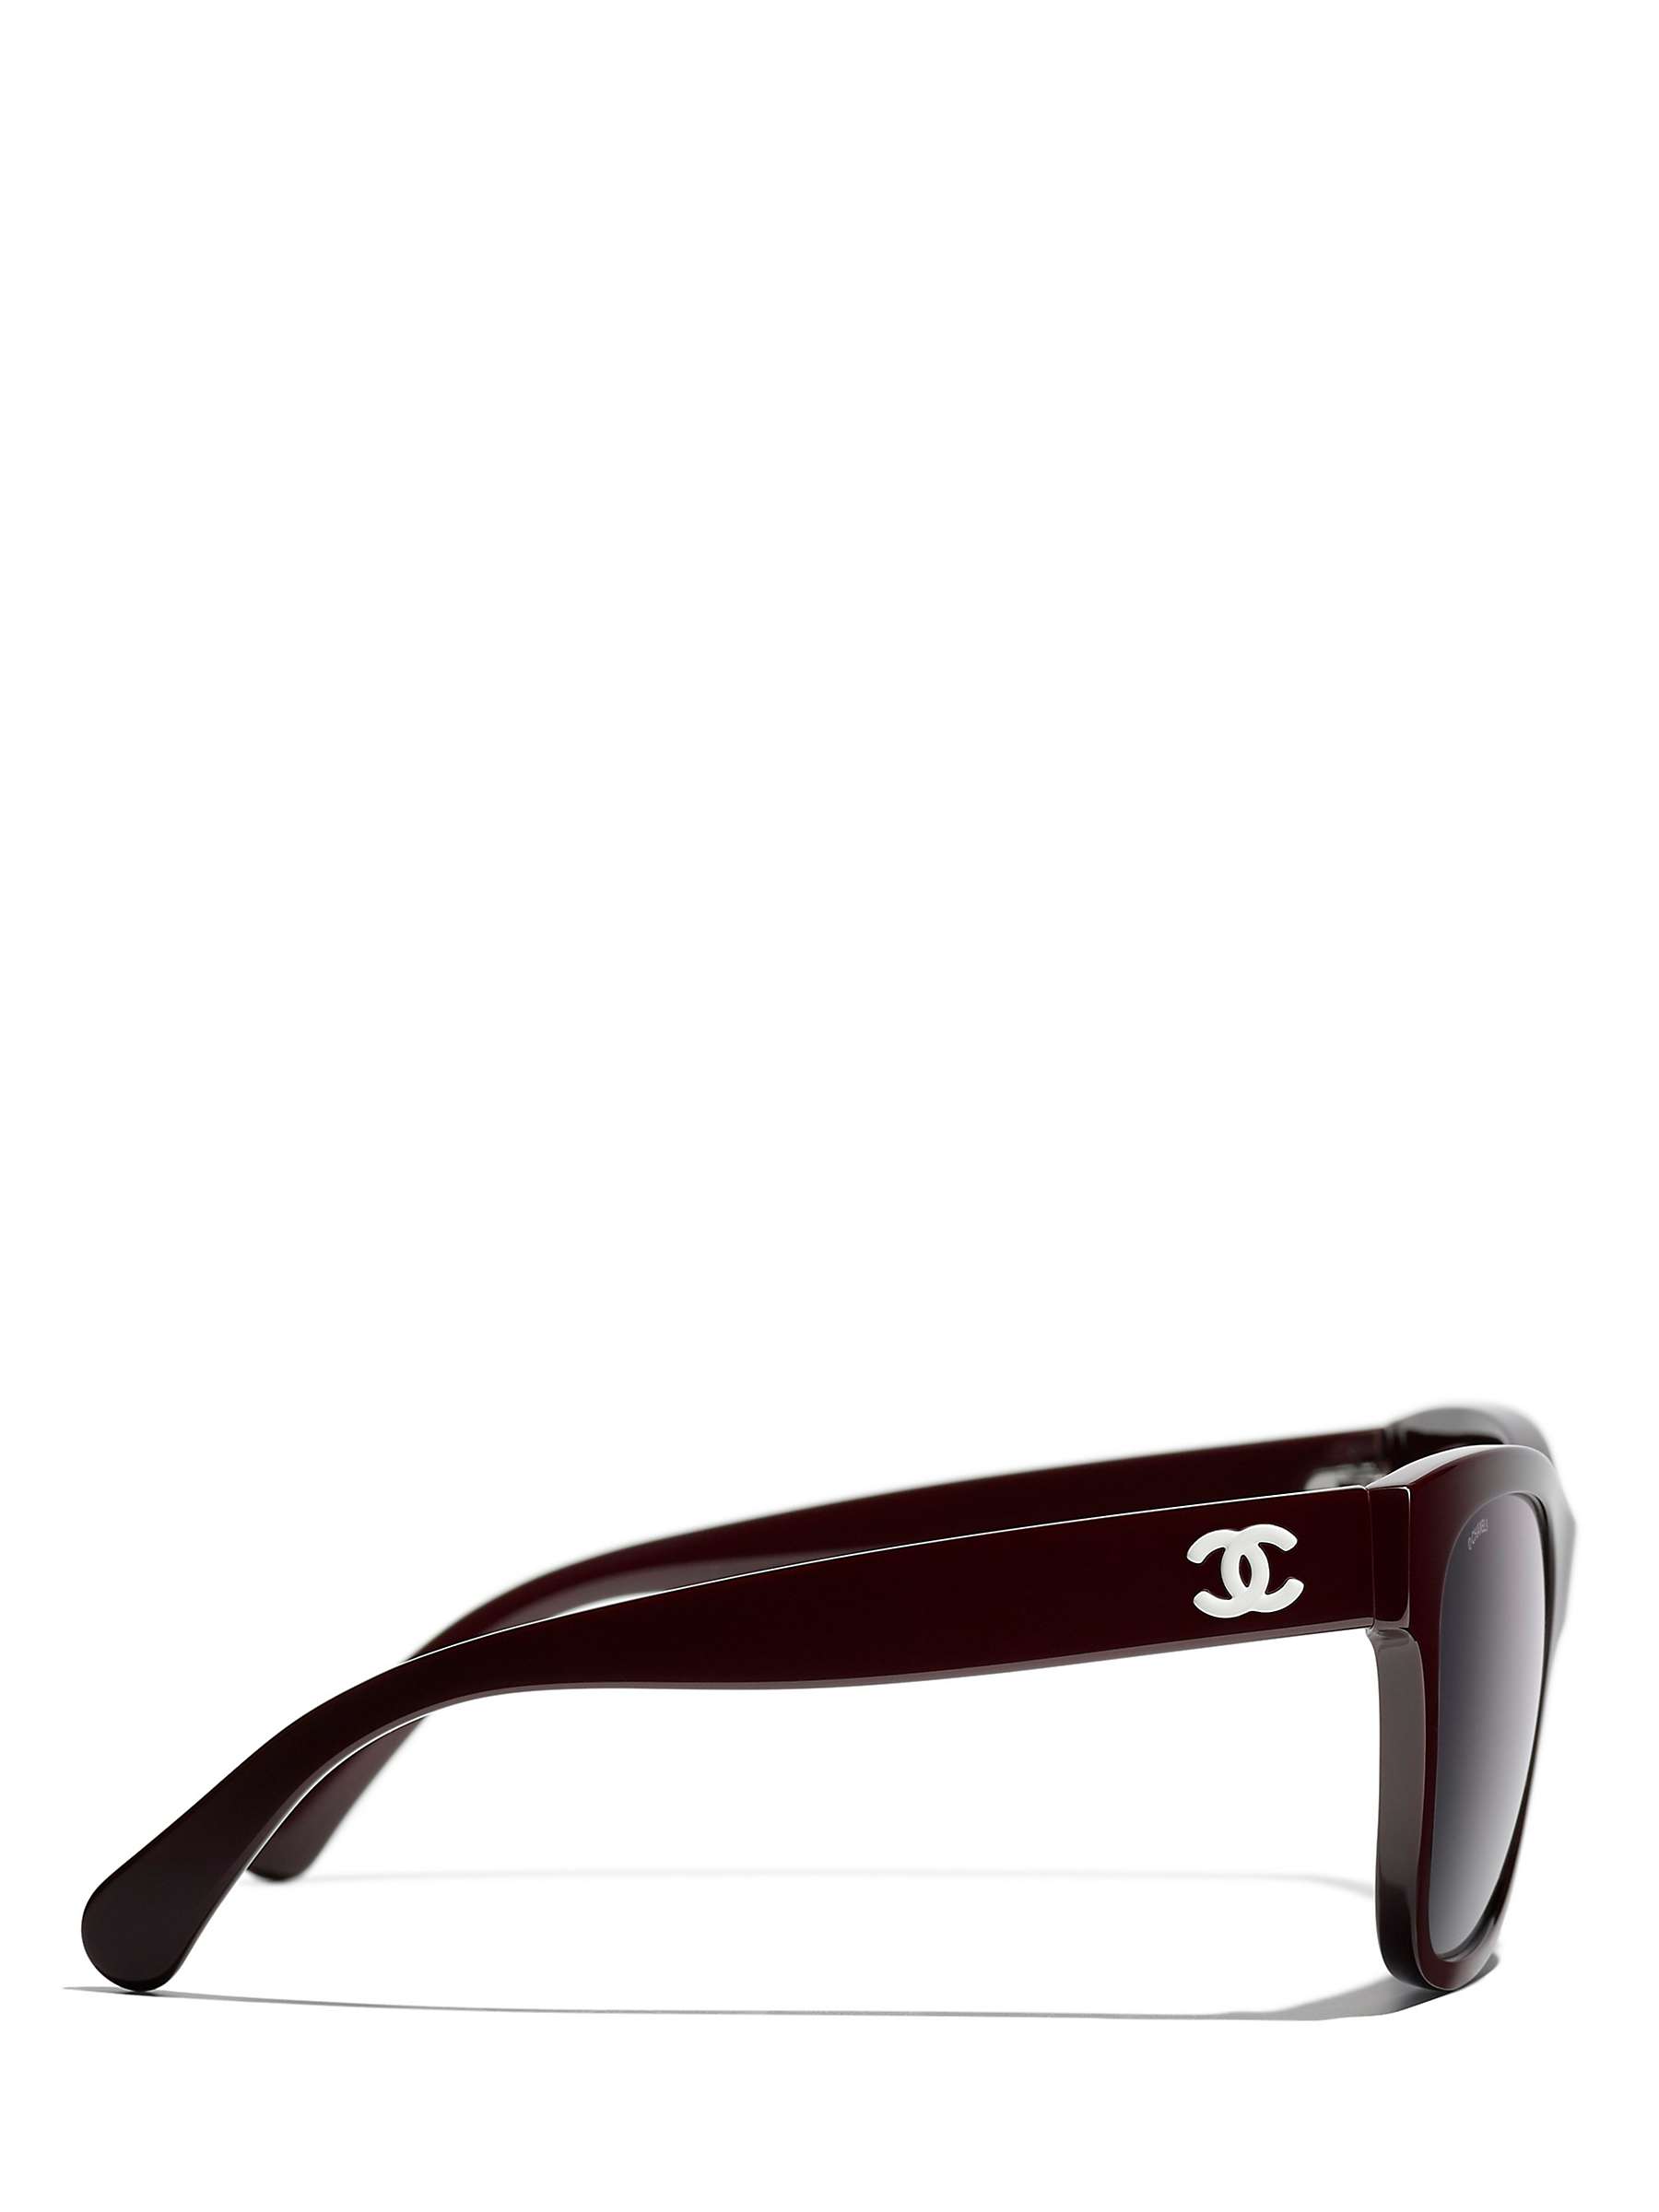 Buy CHANEL Square Sunglasses CH5380 Dark Red/Grey Gradient Online at johnlewis.com